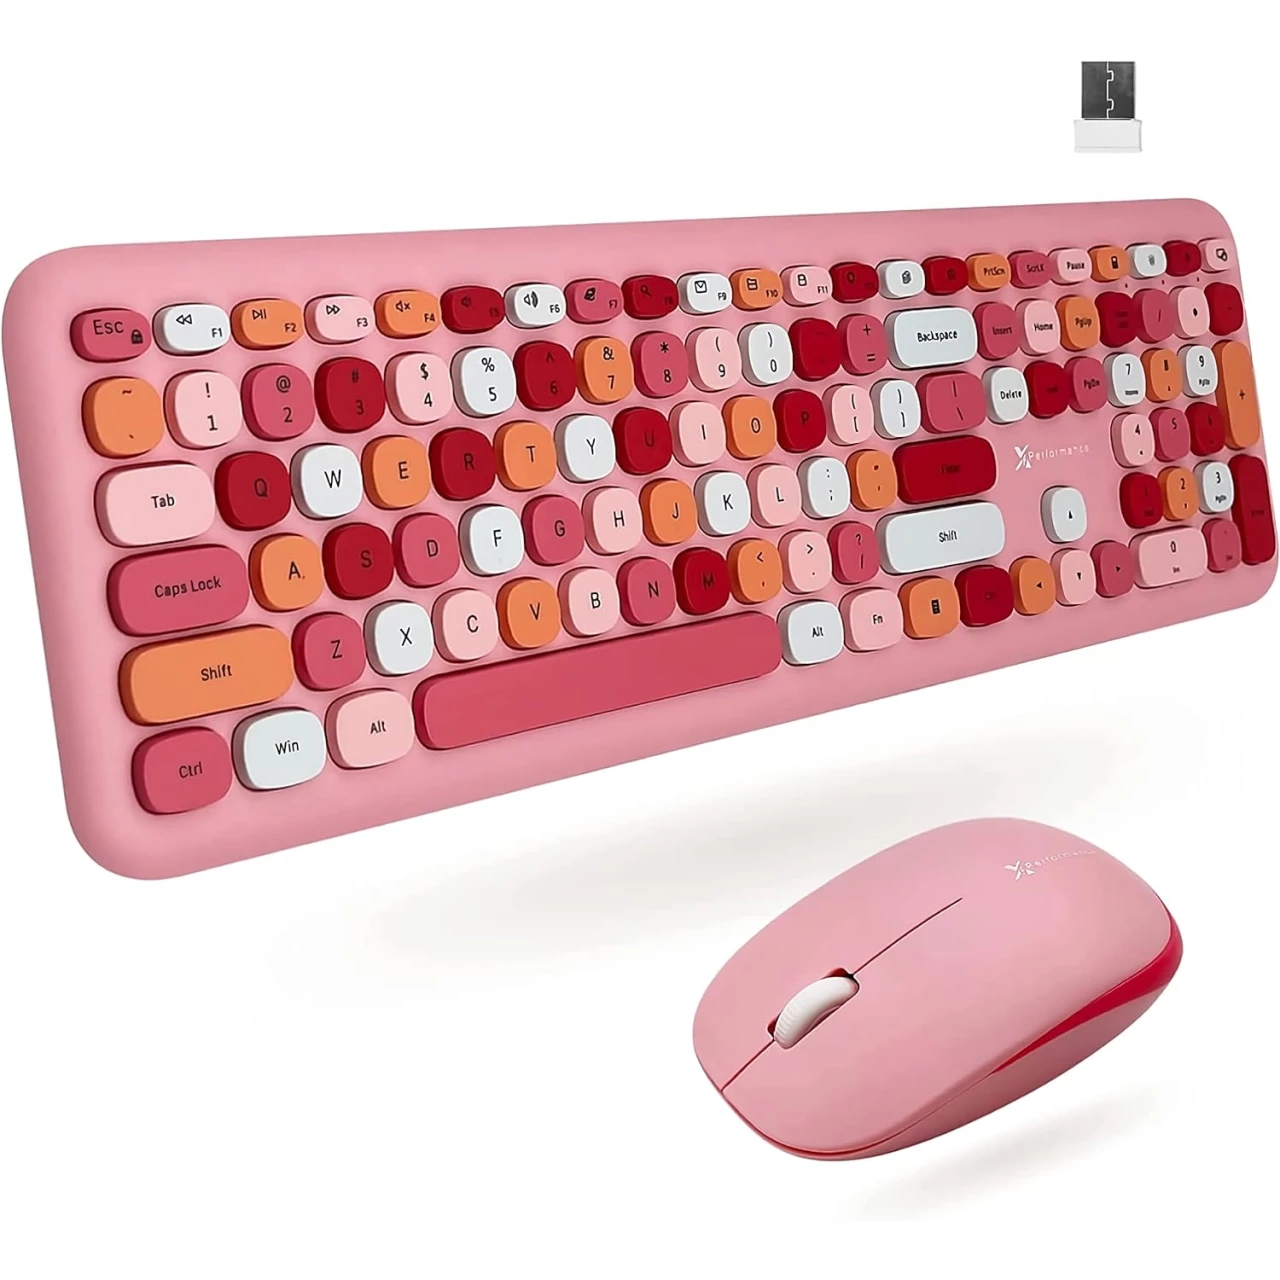 X9 Performance Cute Keyboard and Mouse Combo - 2.4G Wireless Connectivity - Transform Your Space with a Colorful Pink Wireless Keyboard and Mouse Retro Set for Windows PC, Laptop, and Chrome